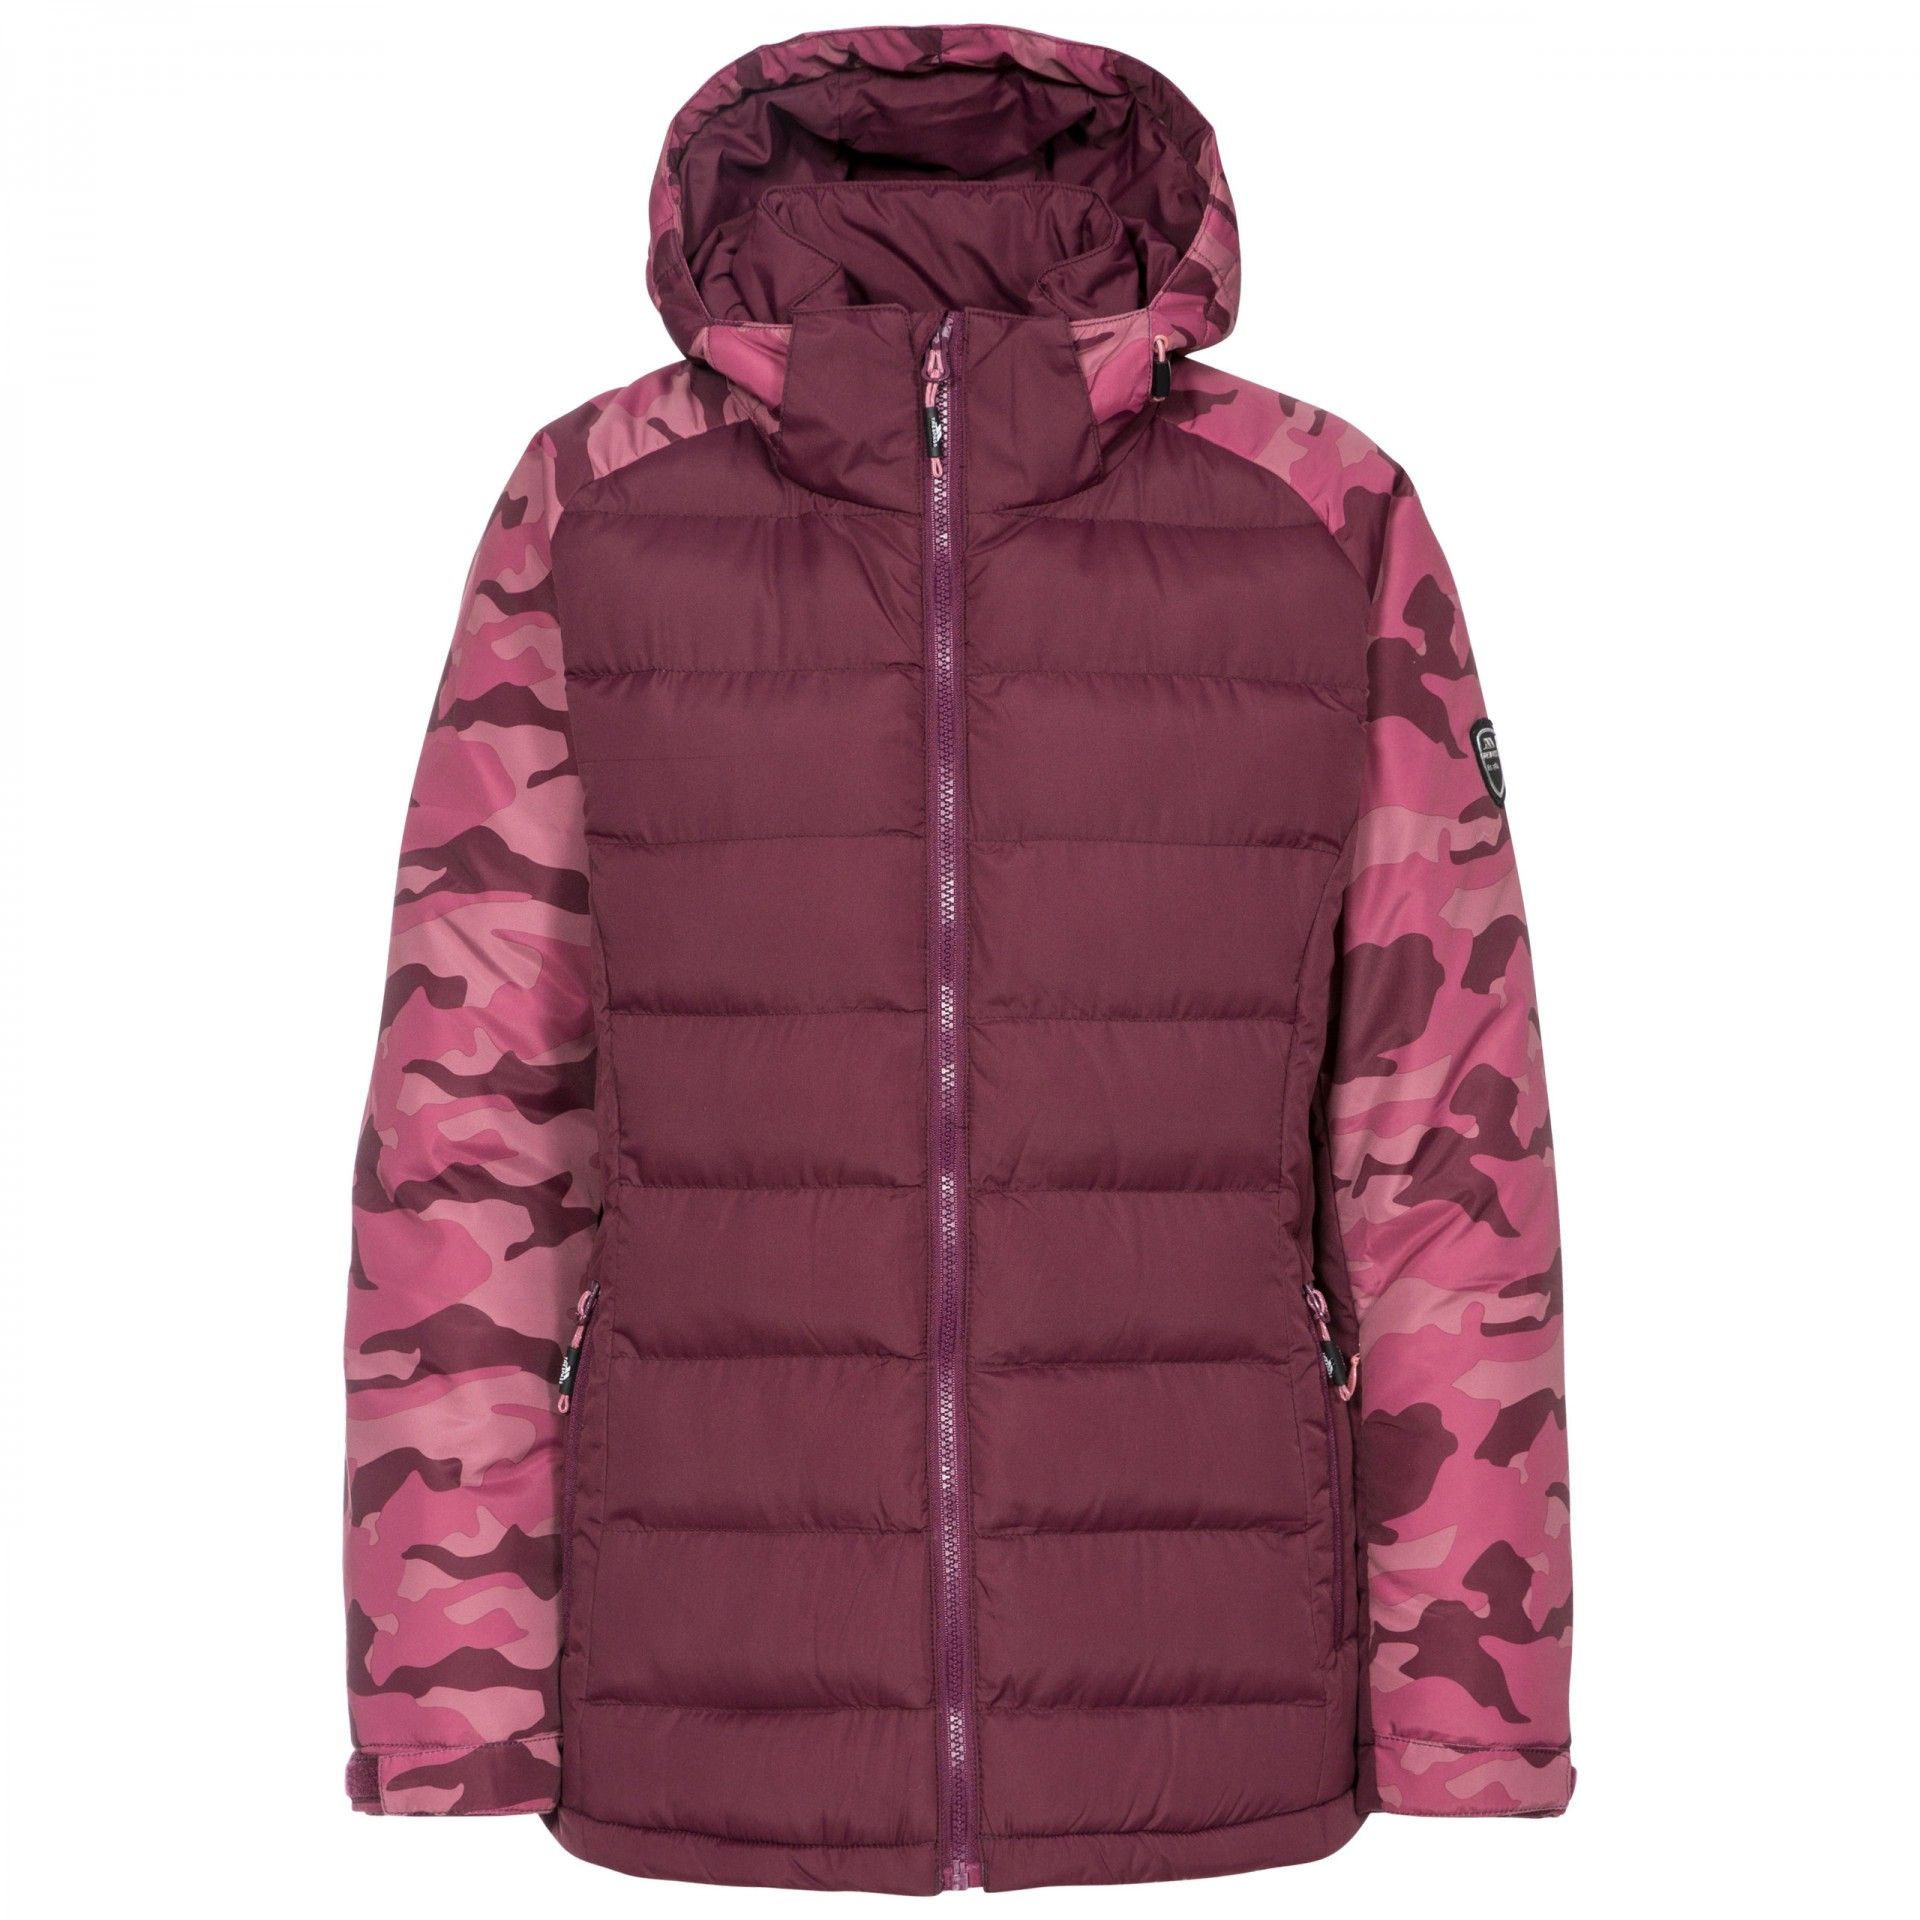 Shell material: 100% polyester pongee AC coated. Lining and filling material: 100% polyester. Urge women`s ski jackets are expertly woven with a lightly padded windproof shell. Features a zip-off hood, a high neck with a full zip front fastening, 1 ski pass zip pockets, 2 side zip pockets and long sleeves. Also features wrist guards at the adjustable touch fastening cuffs, an inner storm flap, a snowskirt and a drawcord at the hem. The padded jacket is decorated with camo print panels to detail.